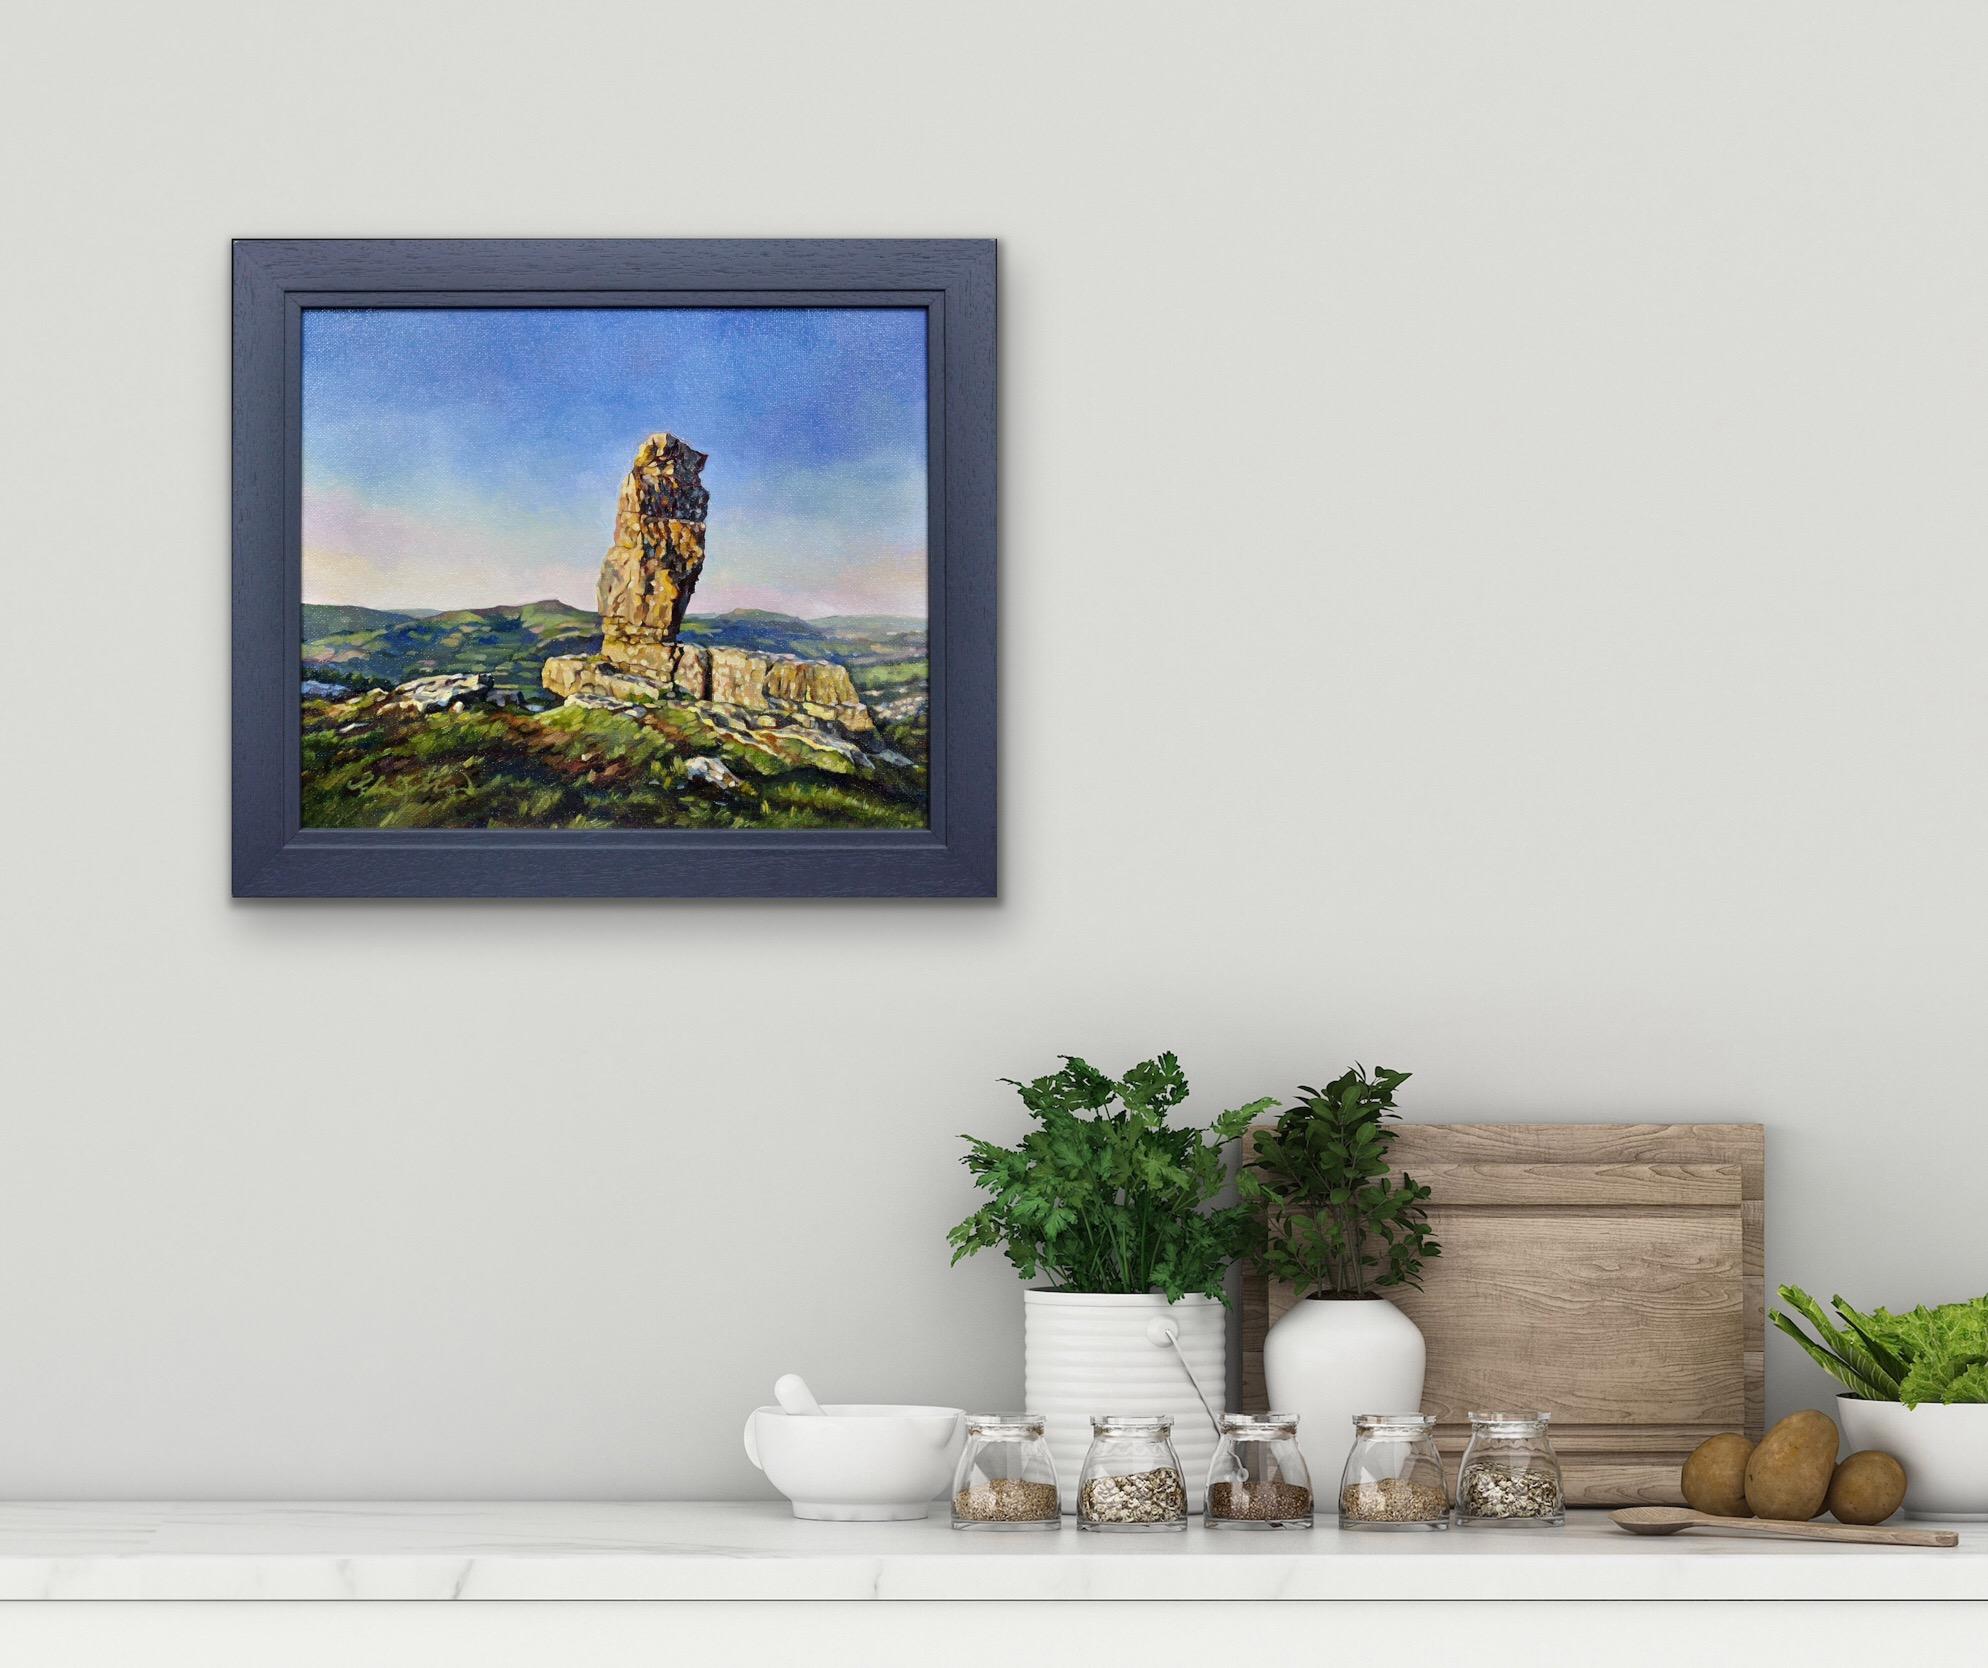 Y Bugail Unig (The Lonely Shepherd), Llangattock, Brecon Beacons. Welsh Folklore For Sale 2